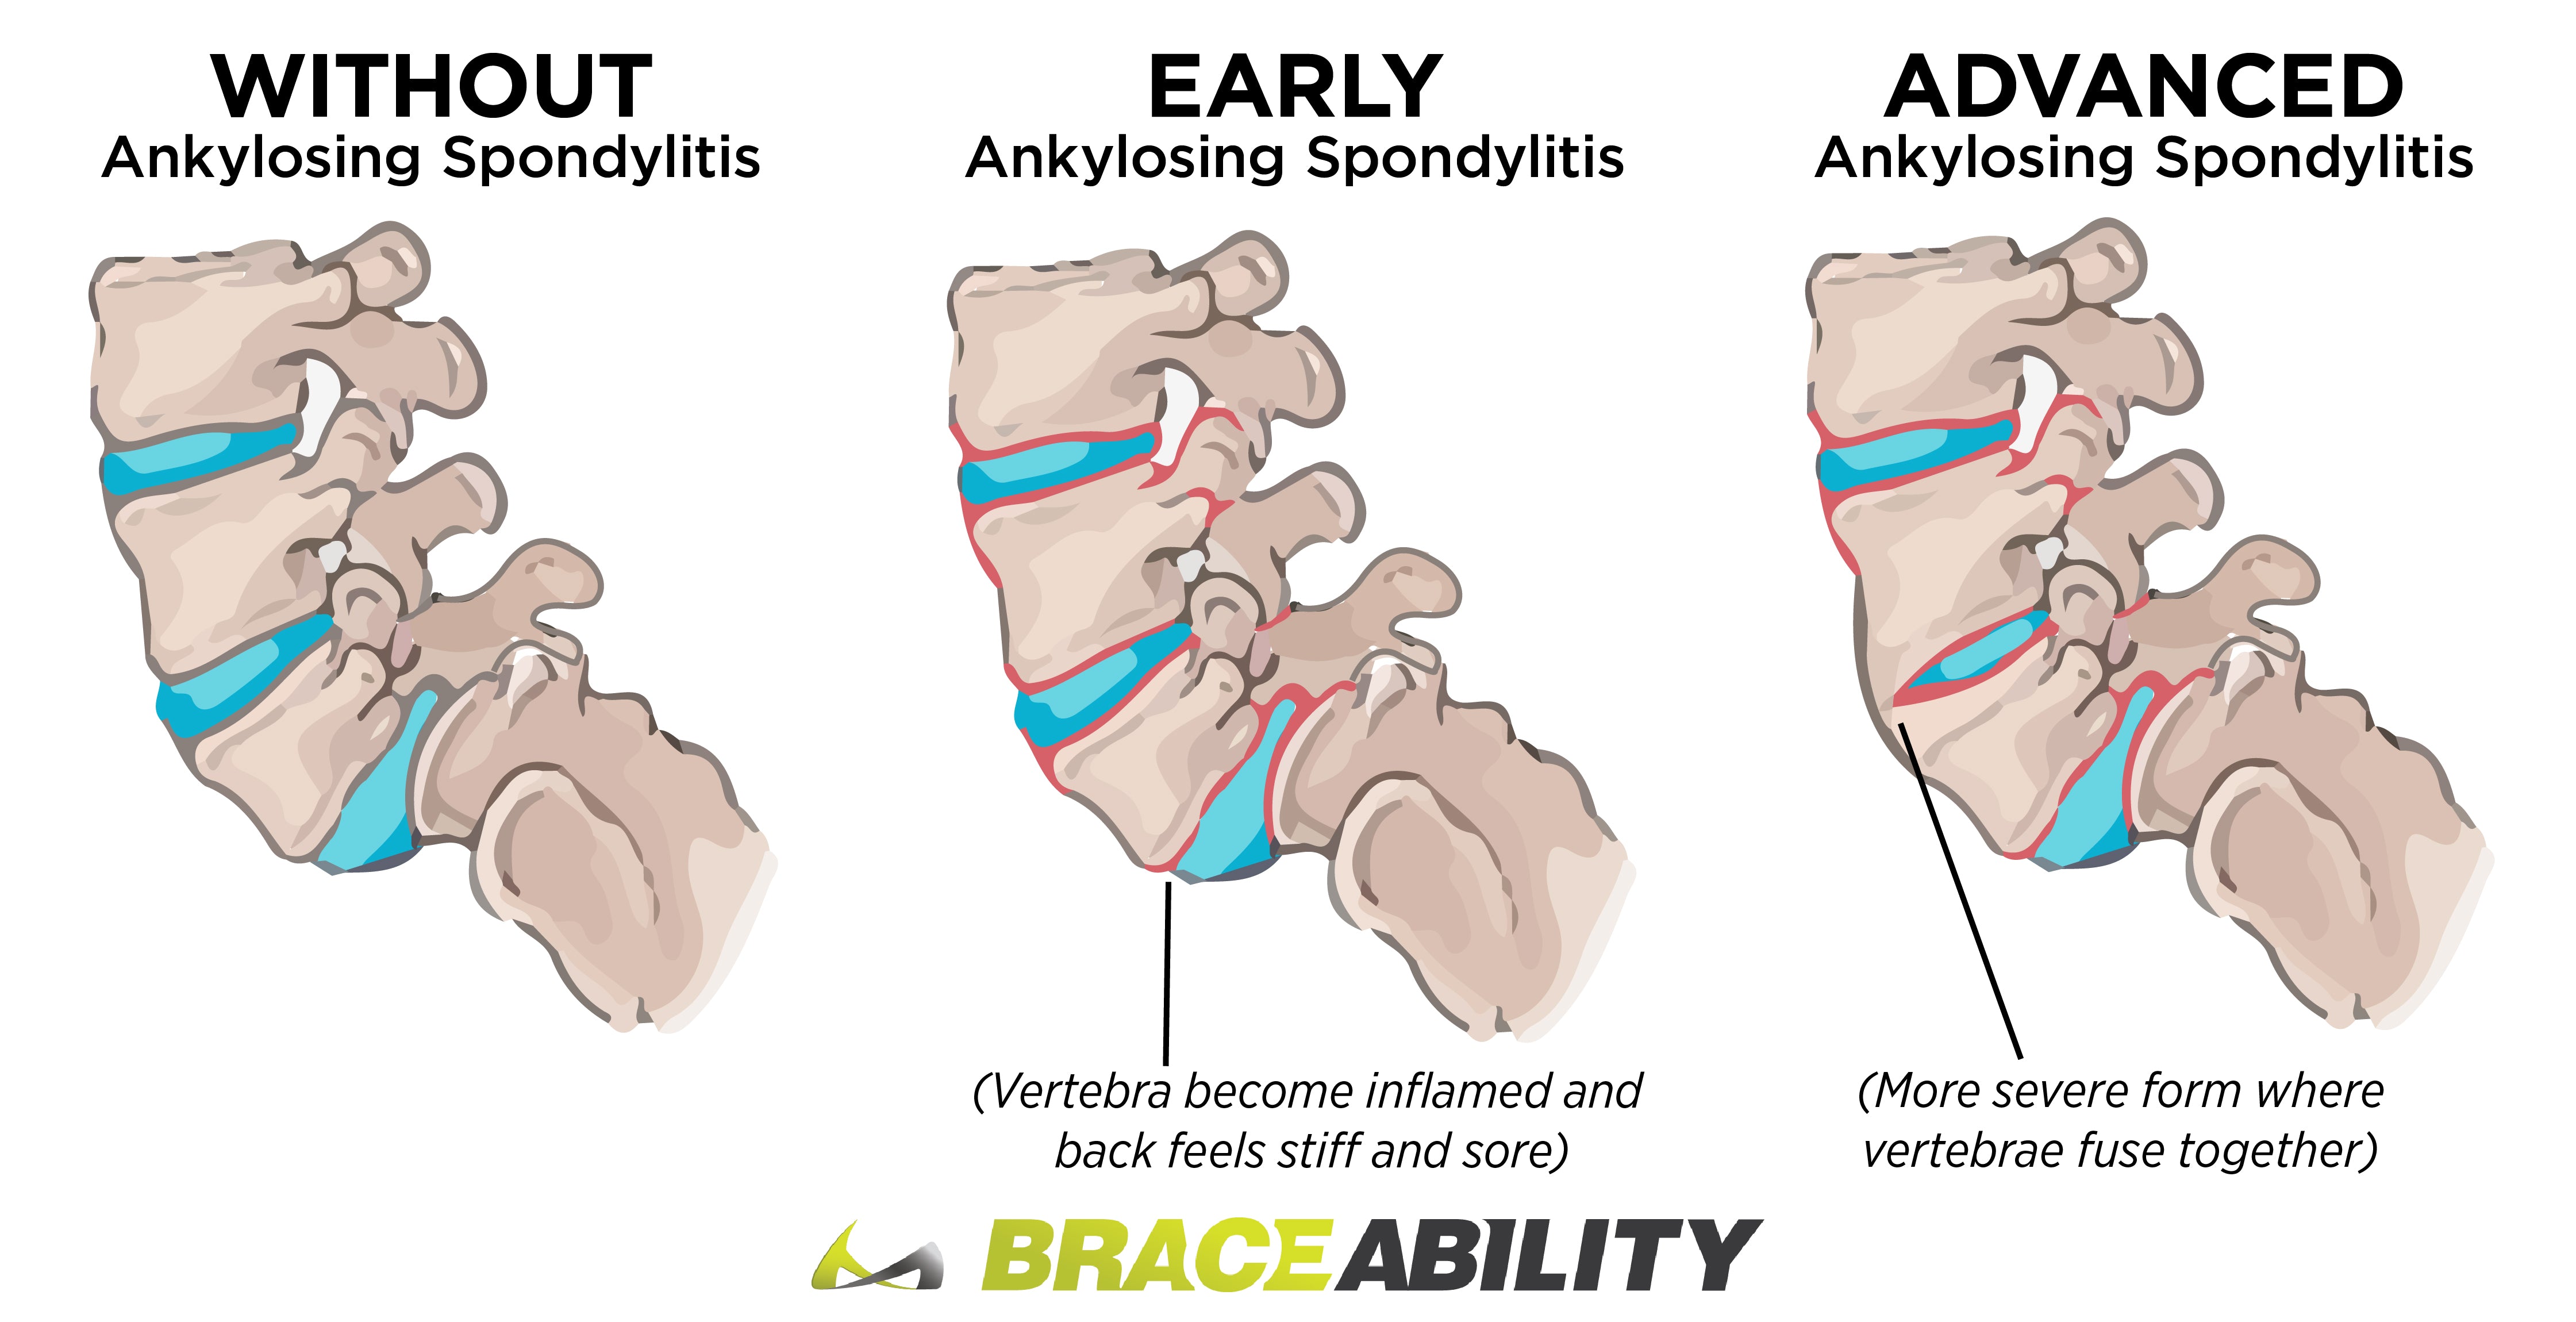 infographic showing the difference between early and advanced ankylosing spondylitis